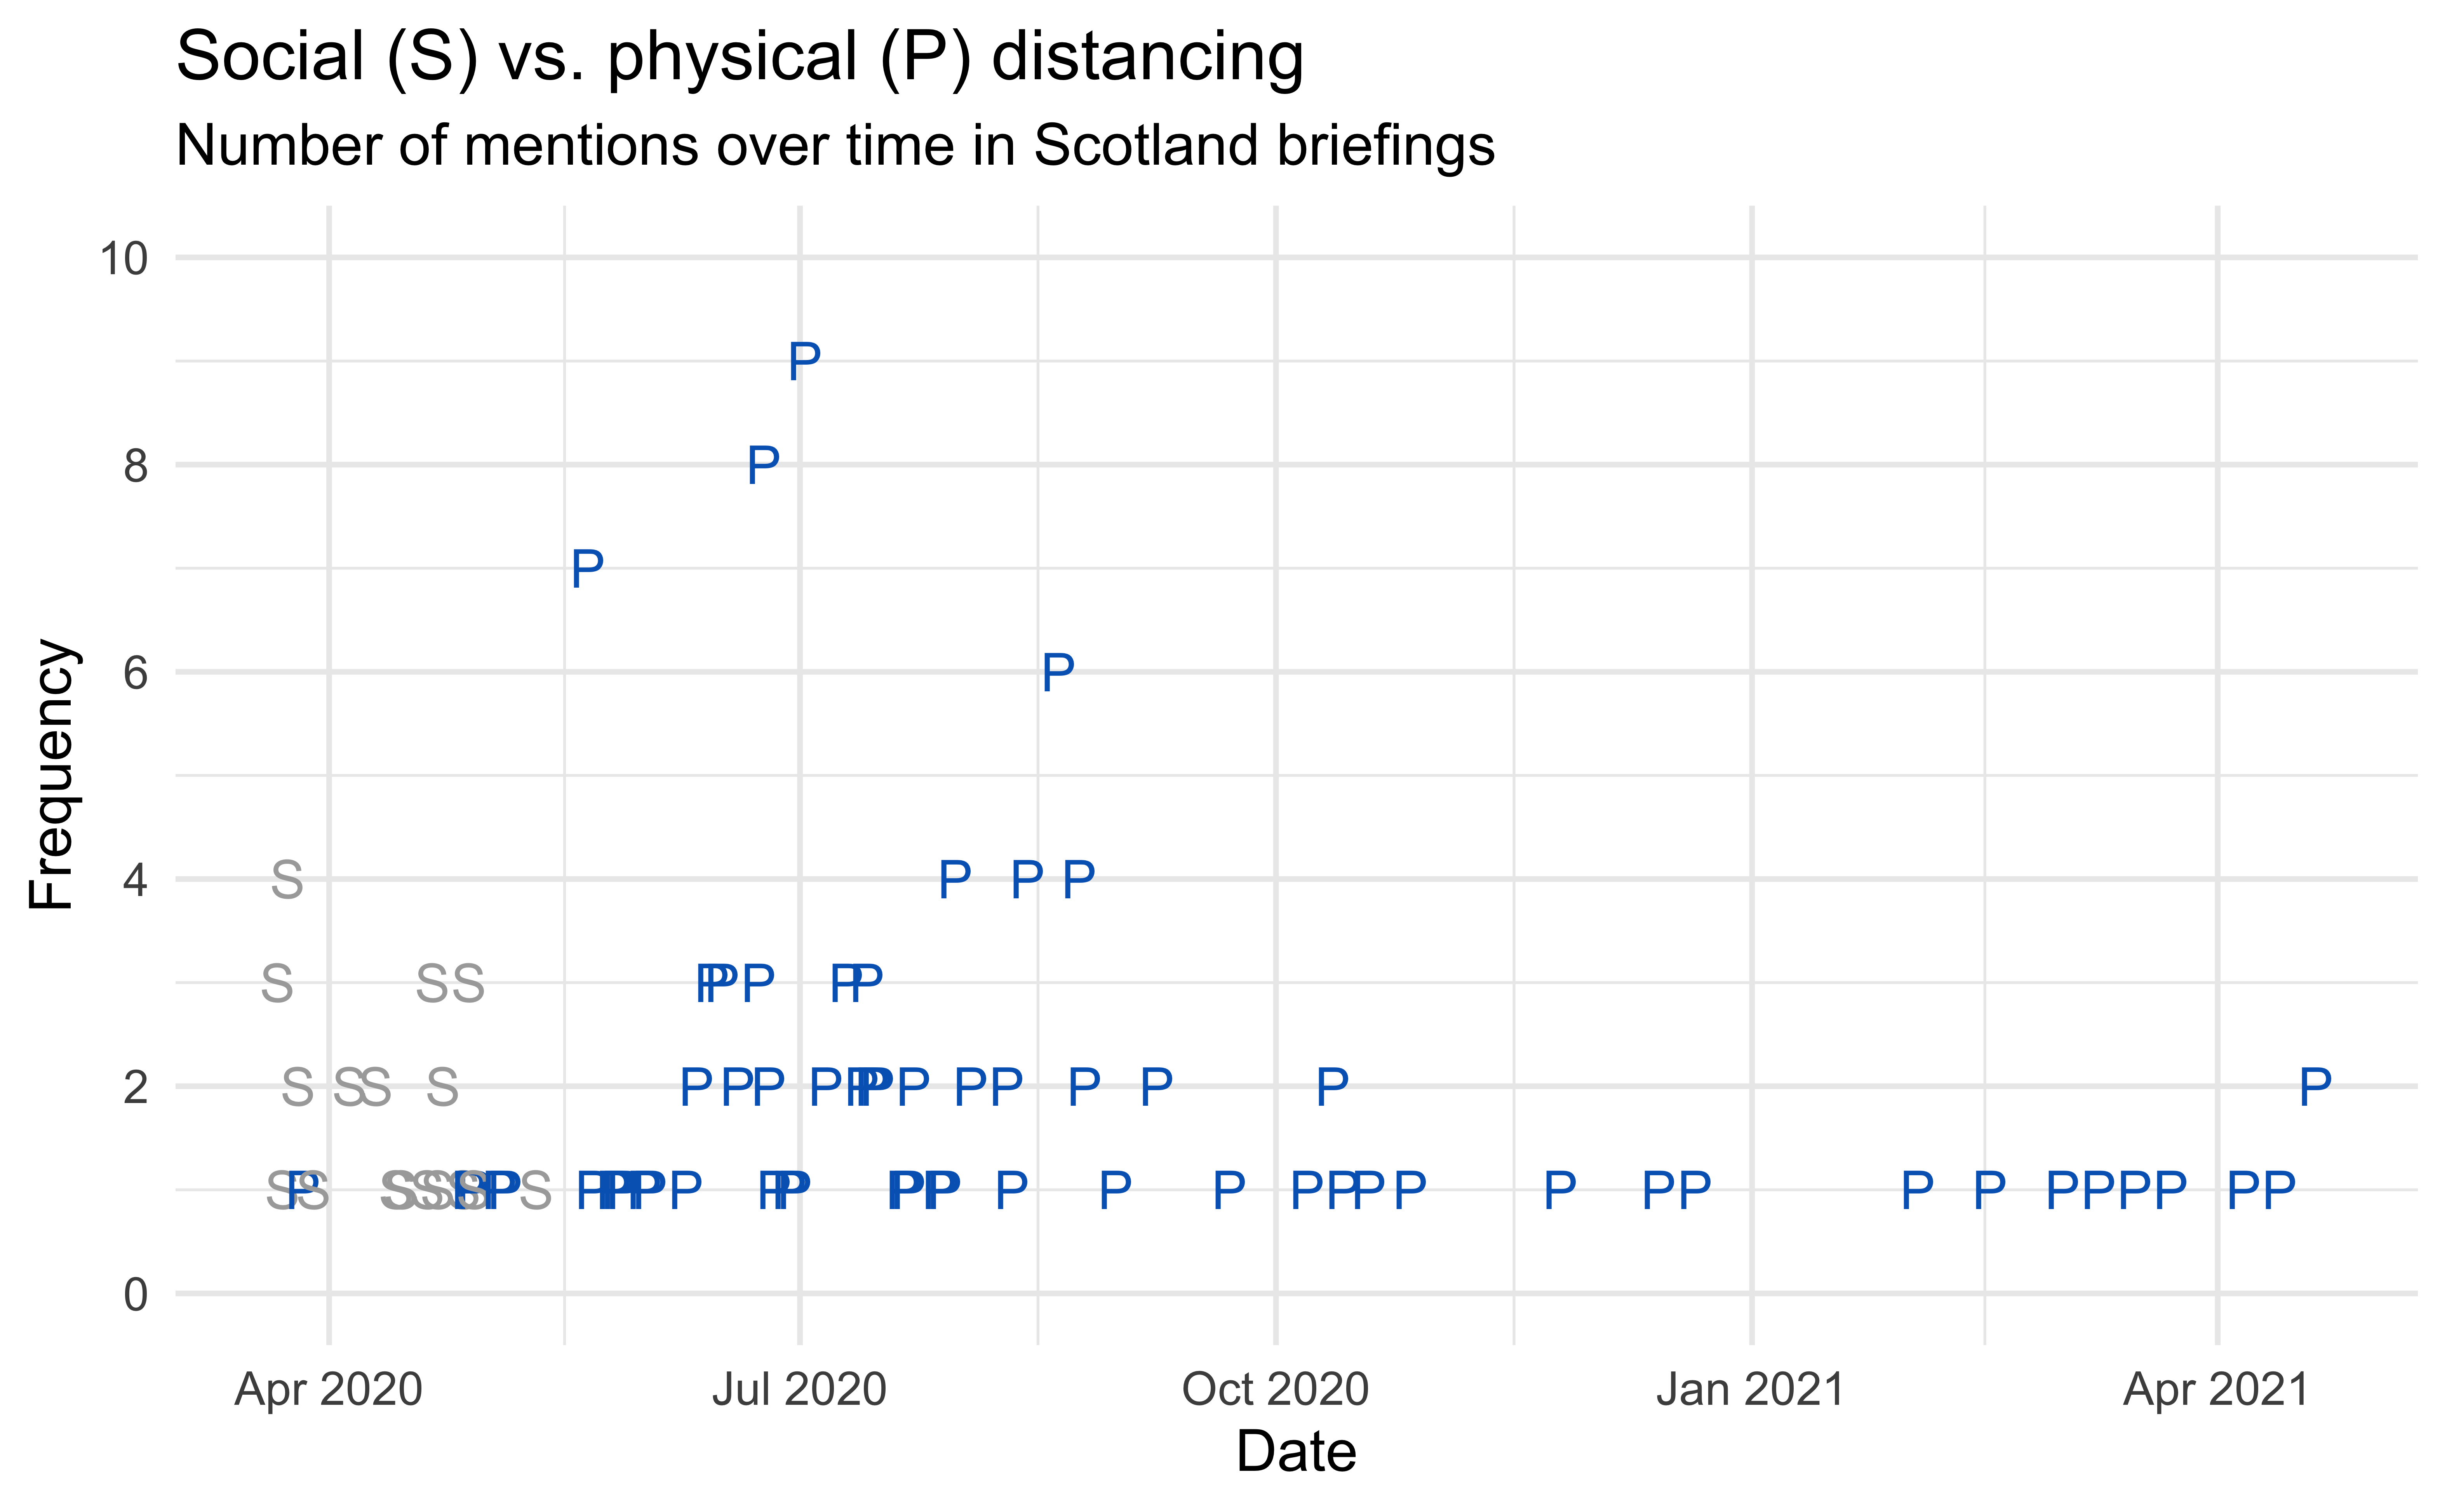 Number of times the phrase social distancing or physical distancing appeared in the briefings over time in Scotland briefings. Early on social distancing is used, then for a while they're both used, and then for majority of the pandemic up today, physical distancing is used.